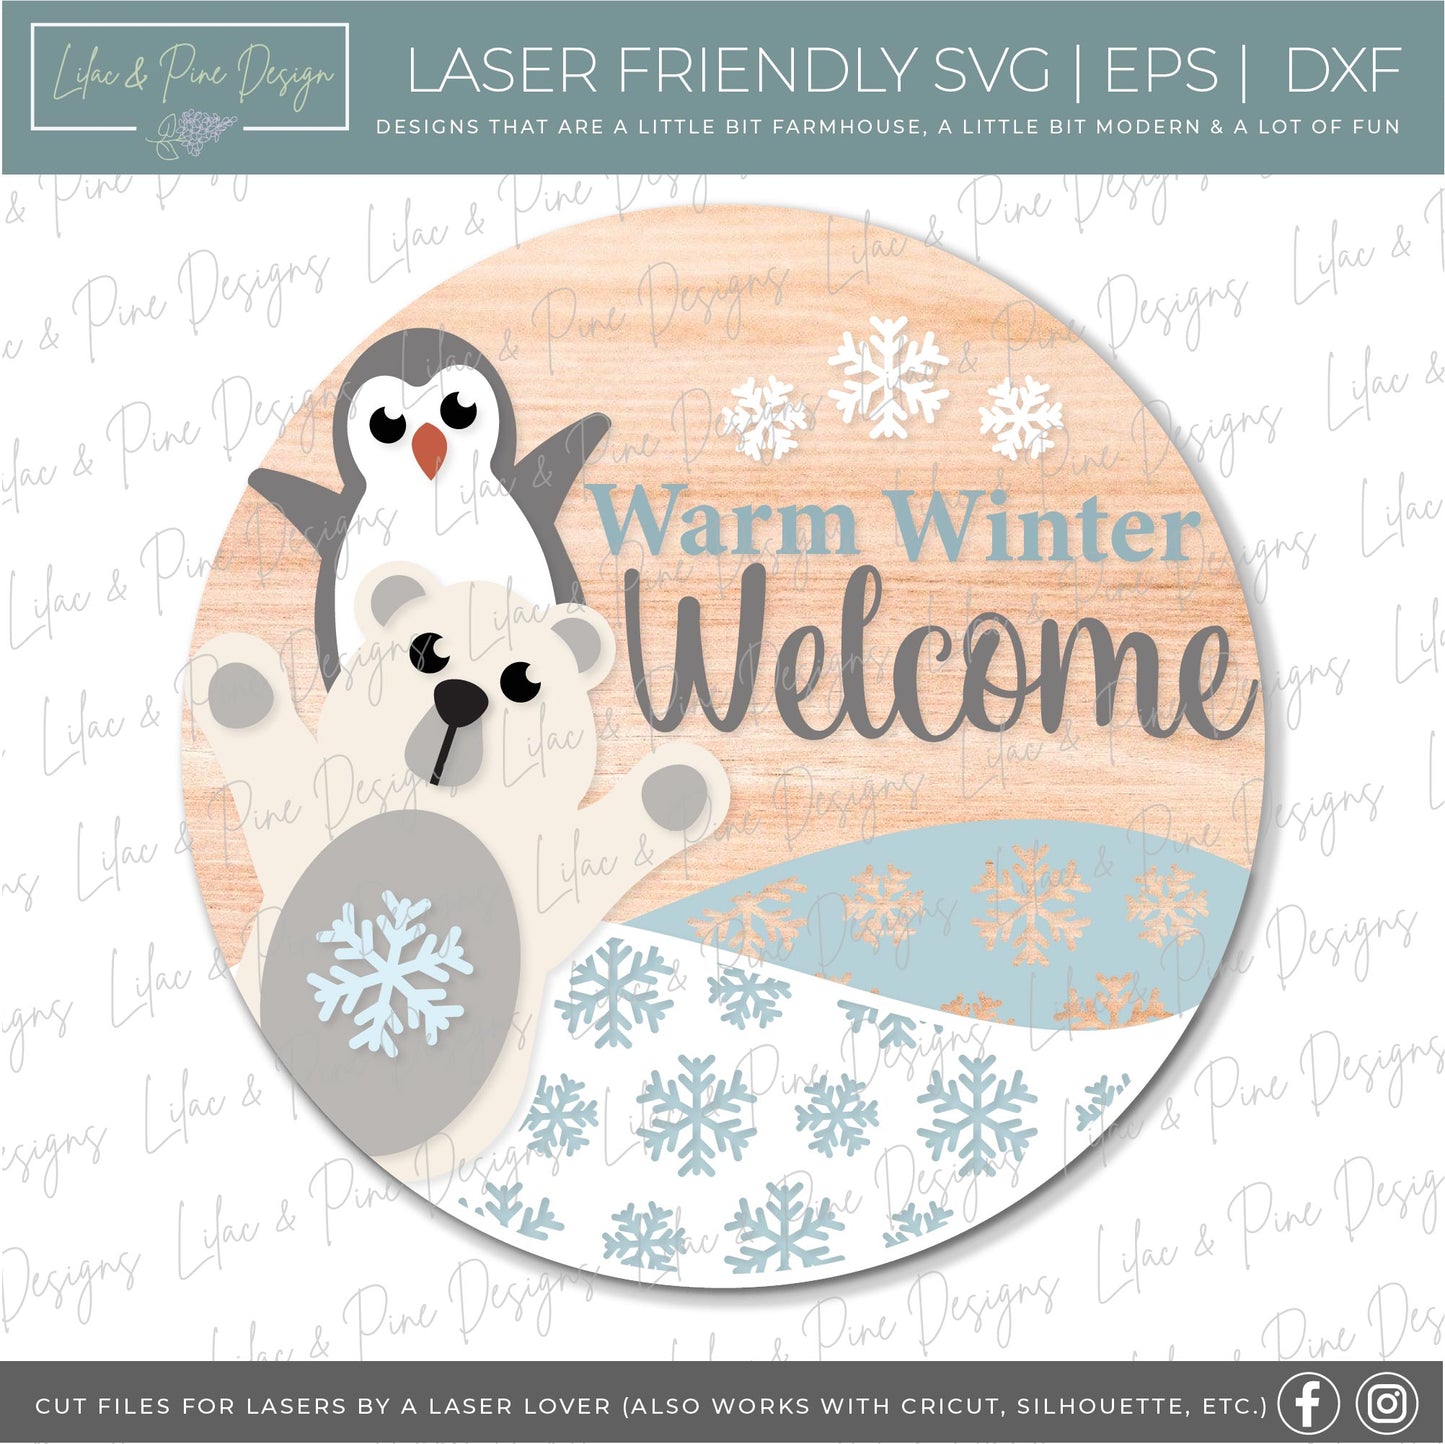 Christmas bundle Volume 2, Christmas Welcome Sign Bundle, 25 laser ready Christmas files, Winter Round Door Hanger, Holiday porch decor